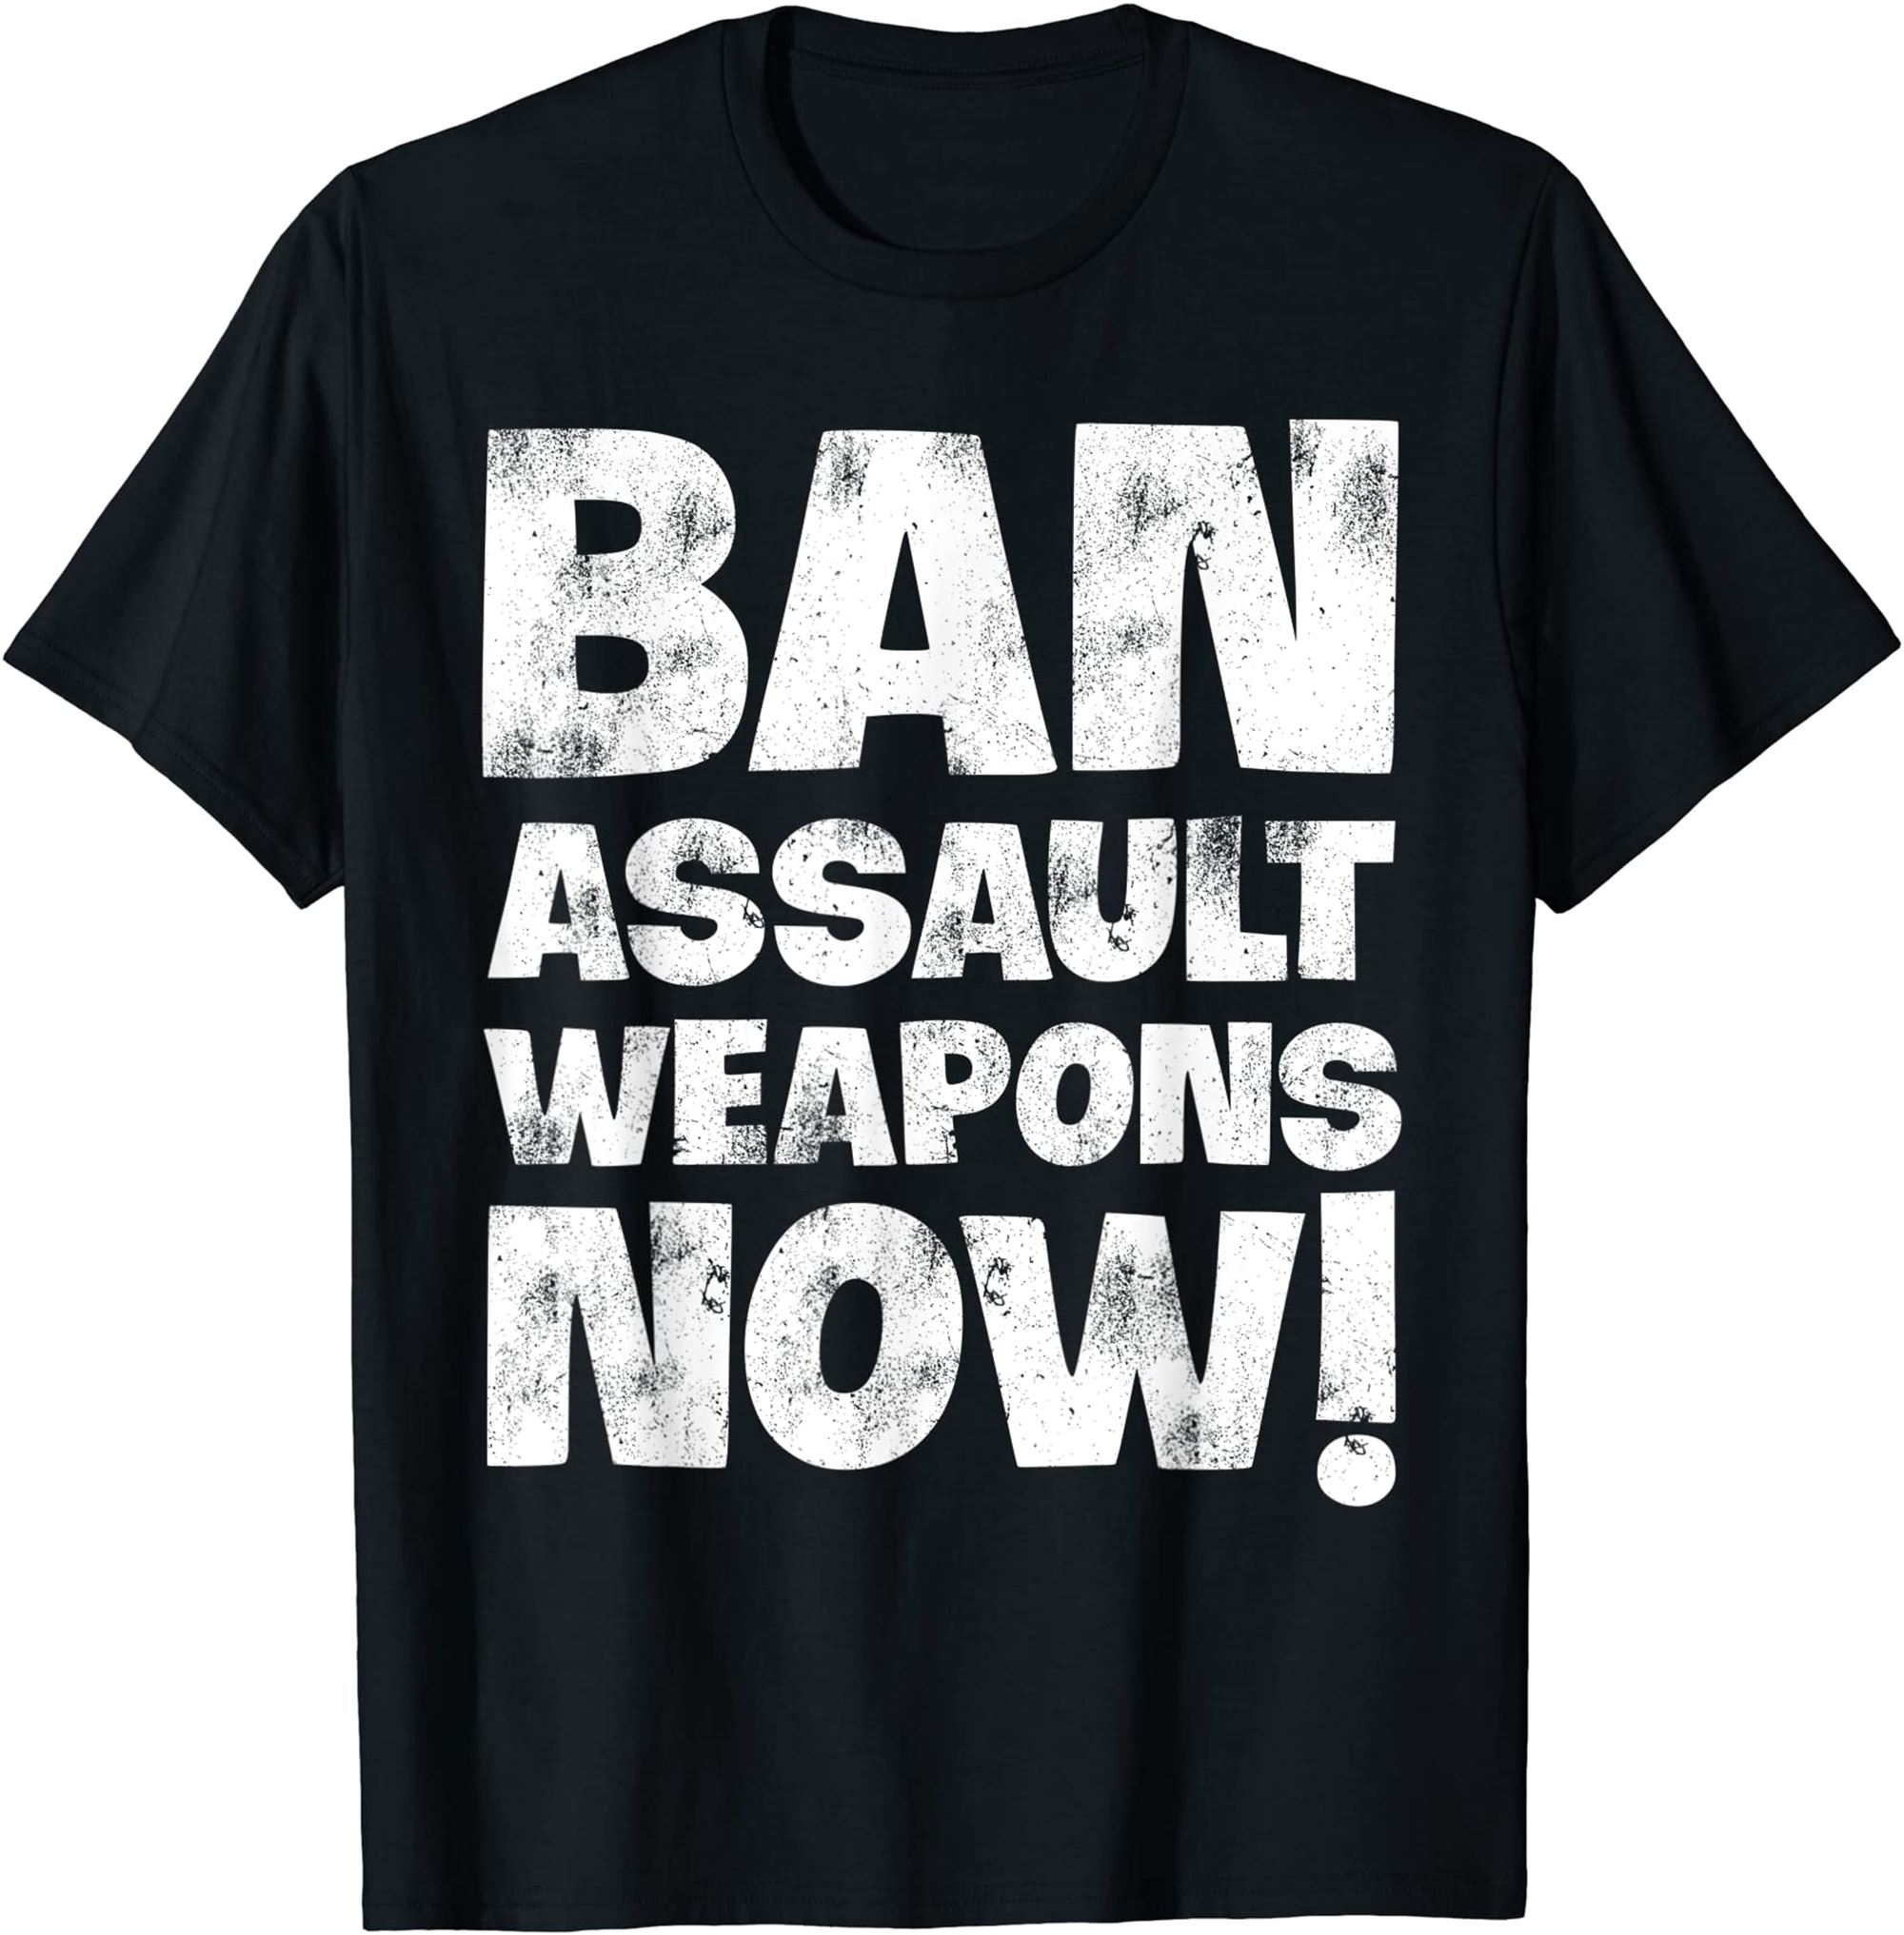 Ban-assault-weapons-now-t-shirt Size Up To 5xl